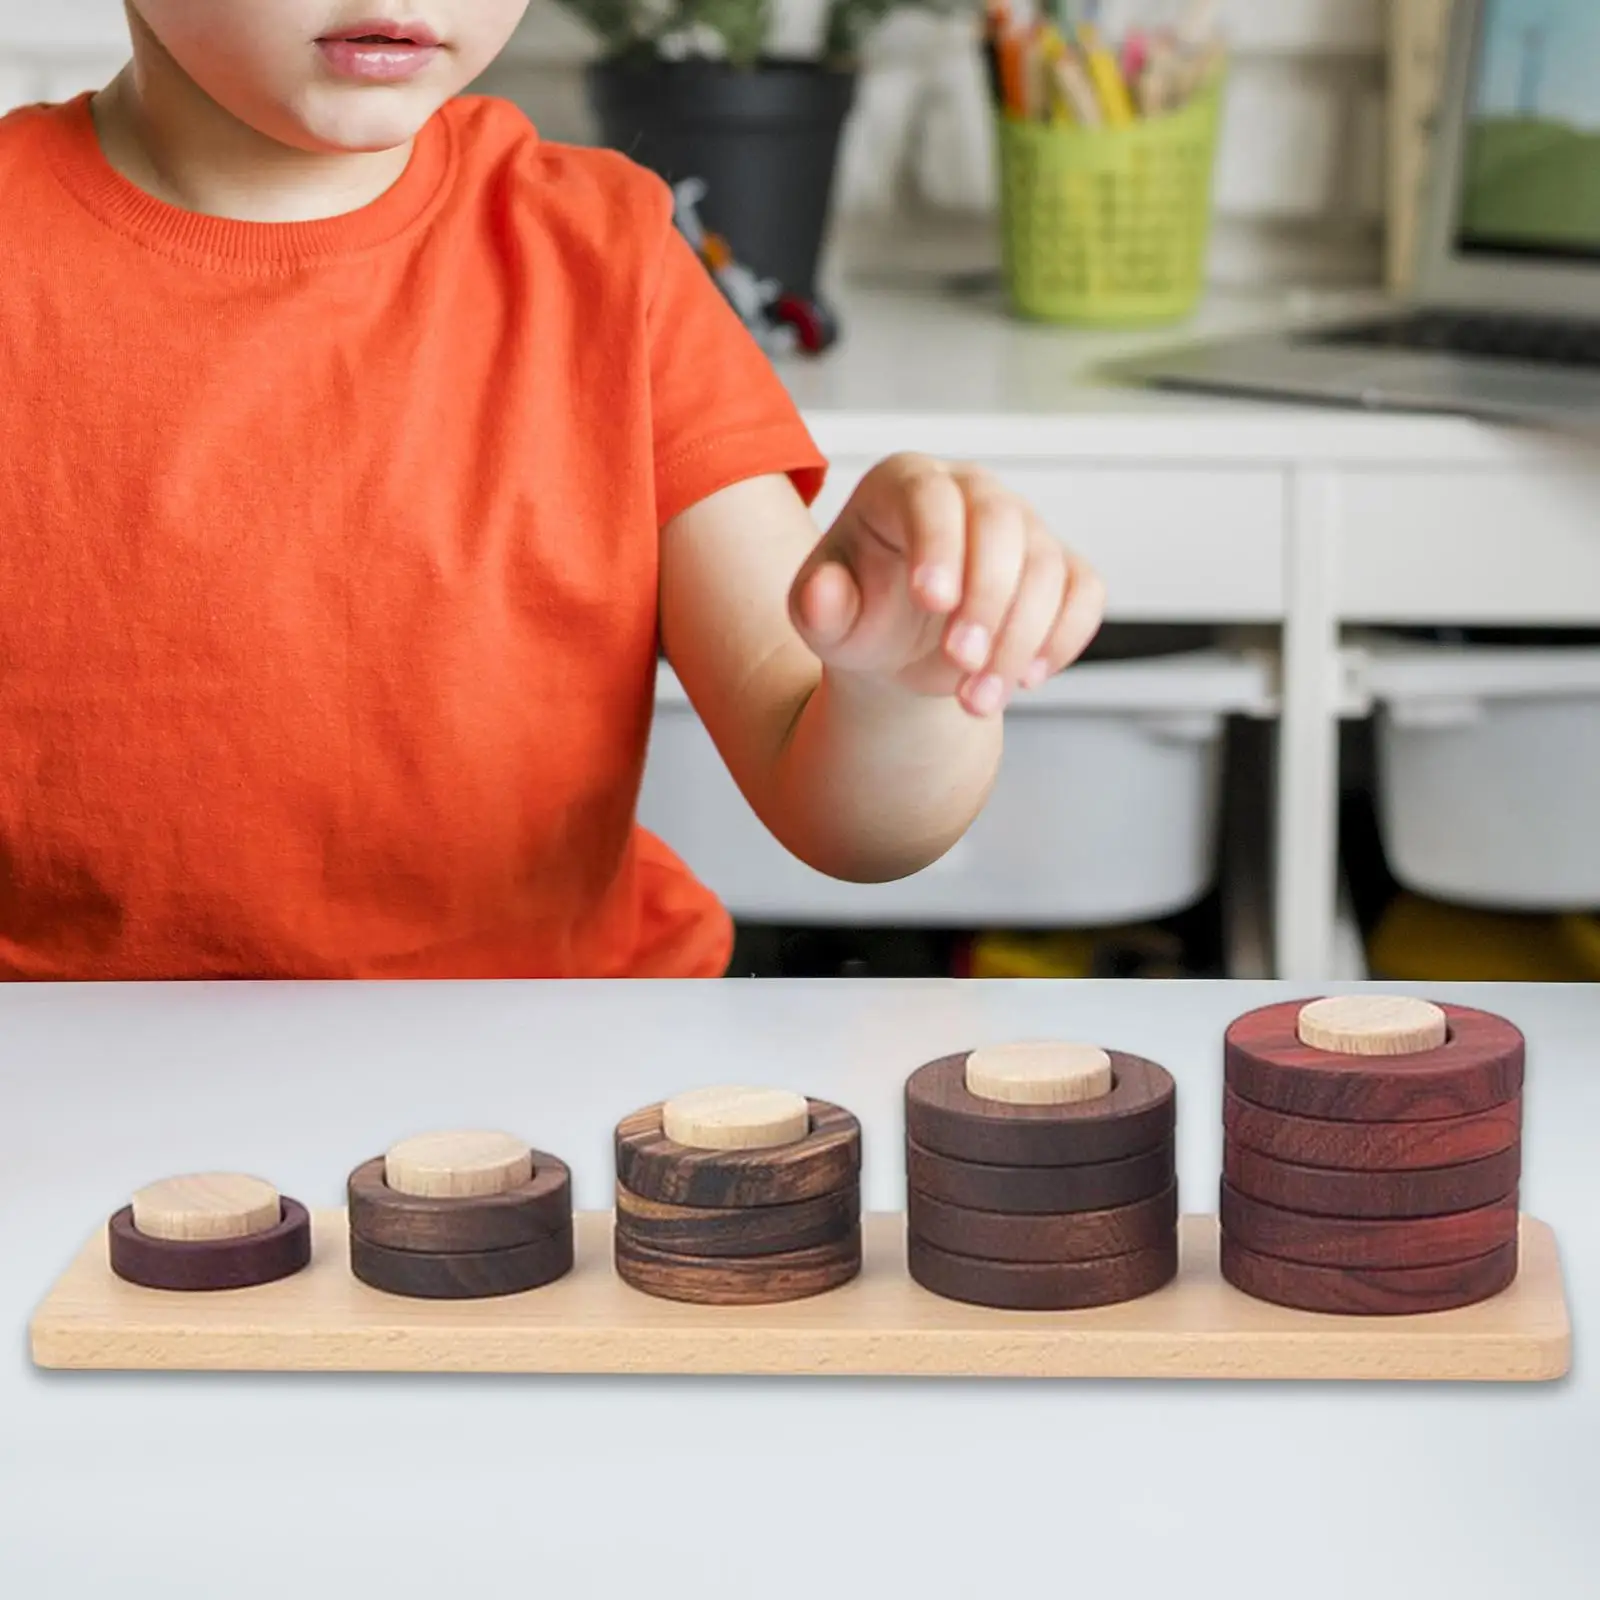 Montessori Stacking Toys Develop Fine Motor Skill Educational Learning Toy for Girls Boy Toddlers Kids Children Birthday Gifts